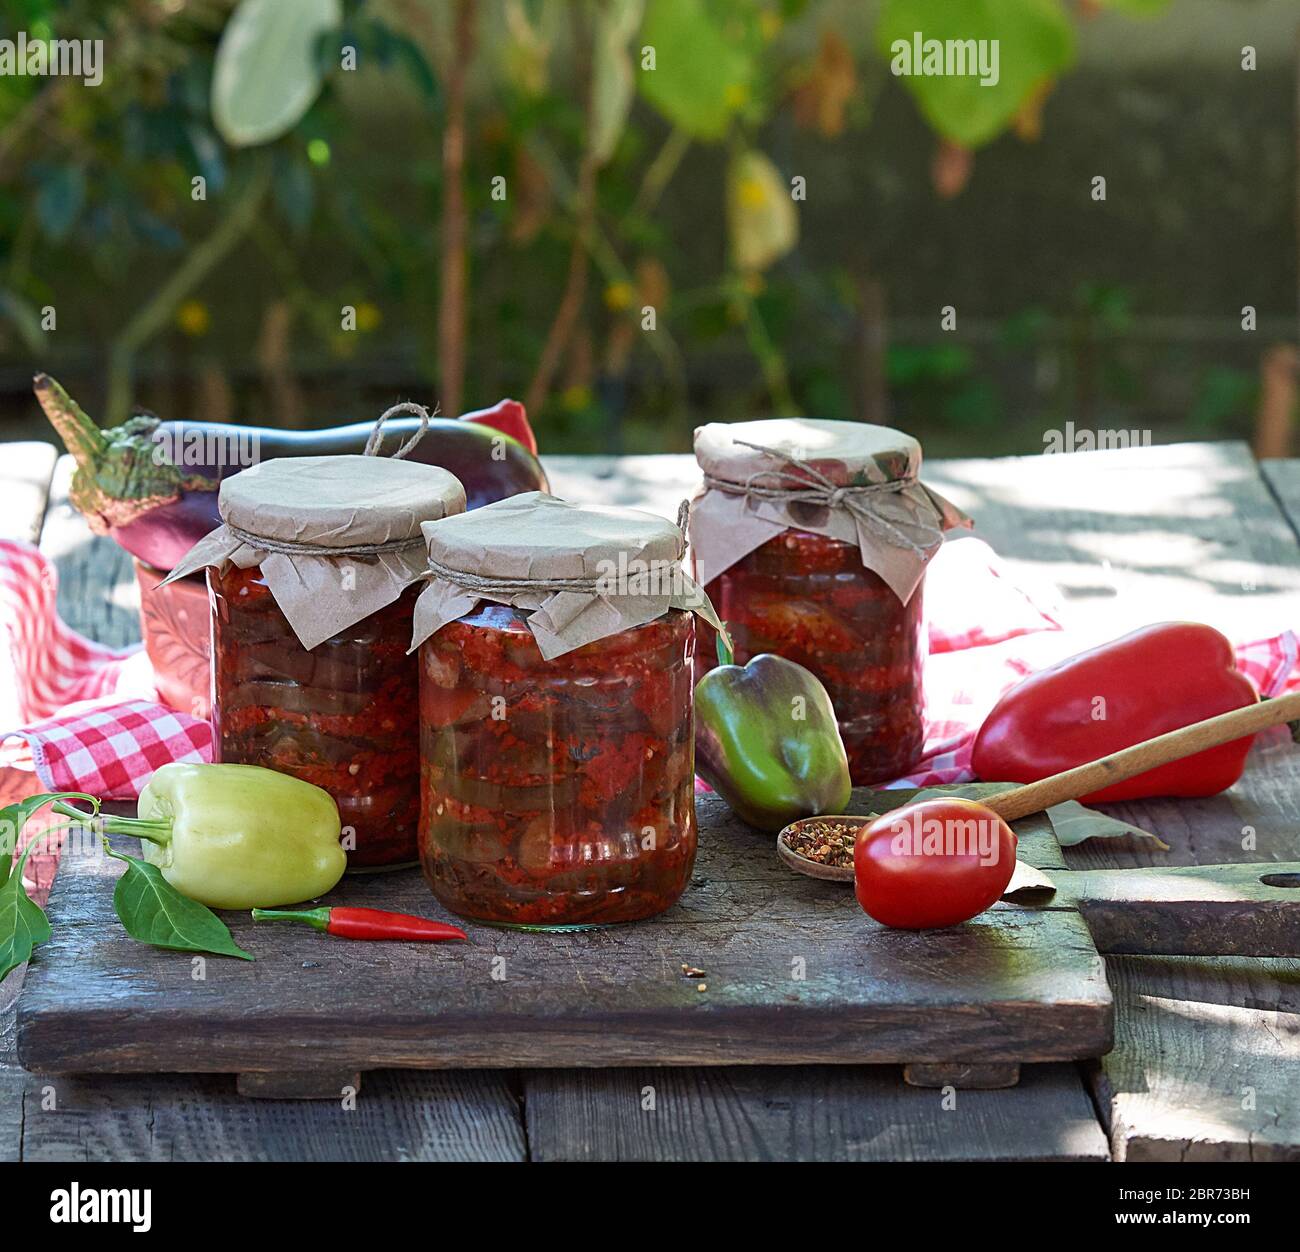 Canned eggplant slices in spicy vegetable sauce in glass jars on a wooden table Stock Photo